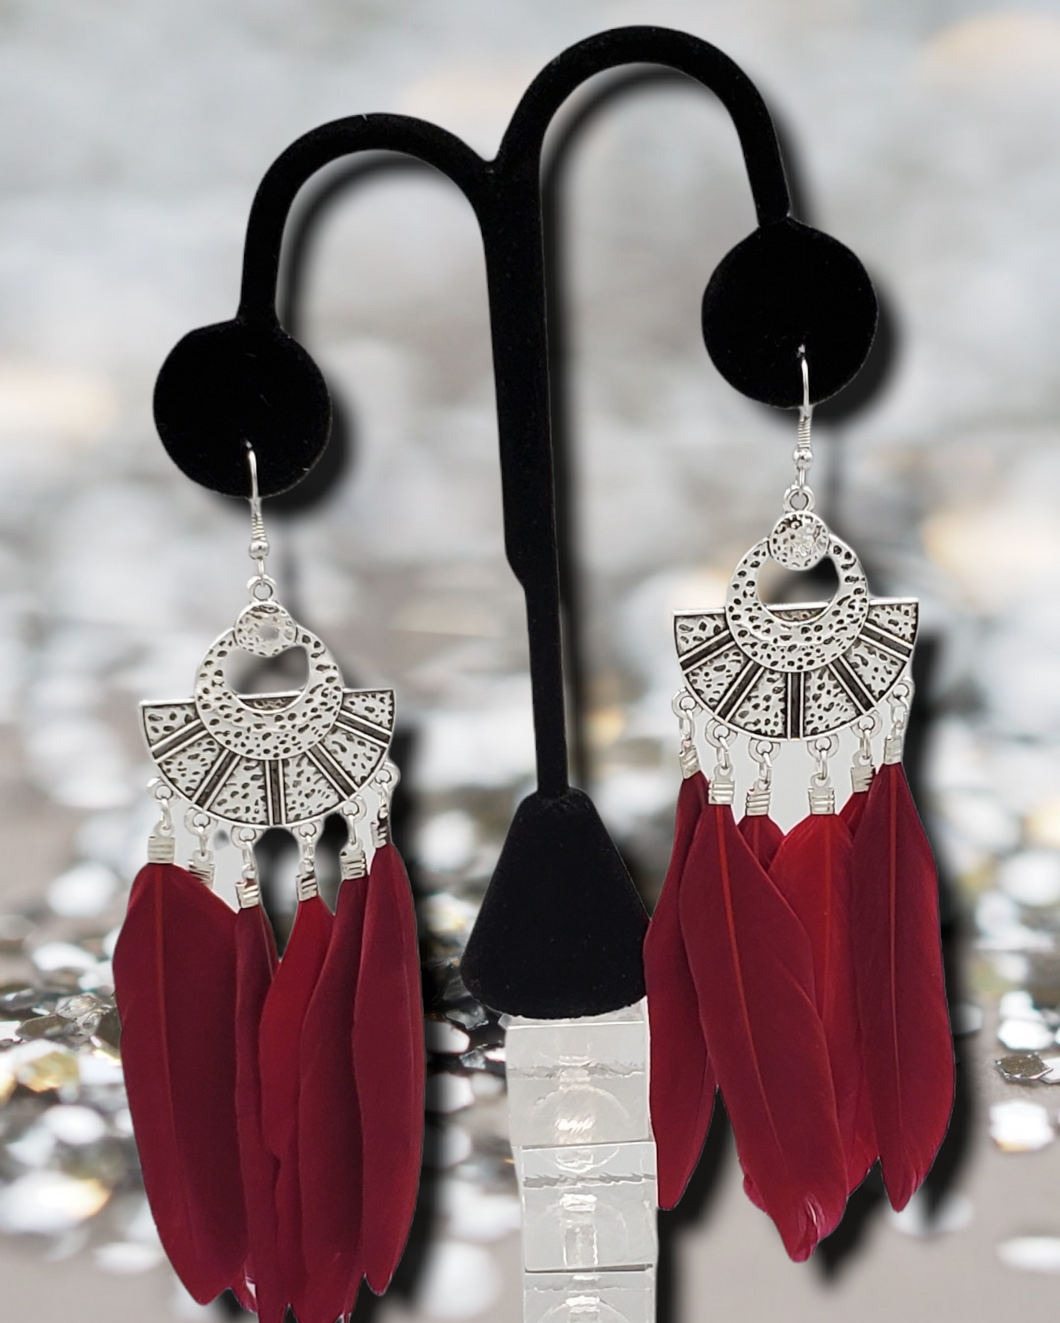 Plume Paradise Red Feather Earrings